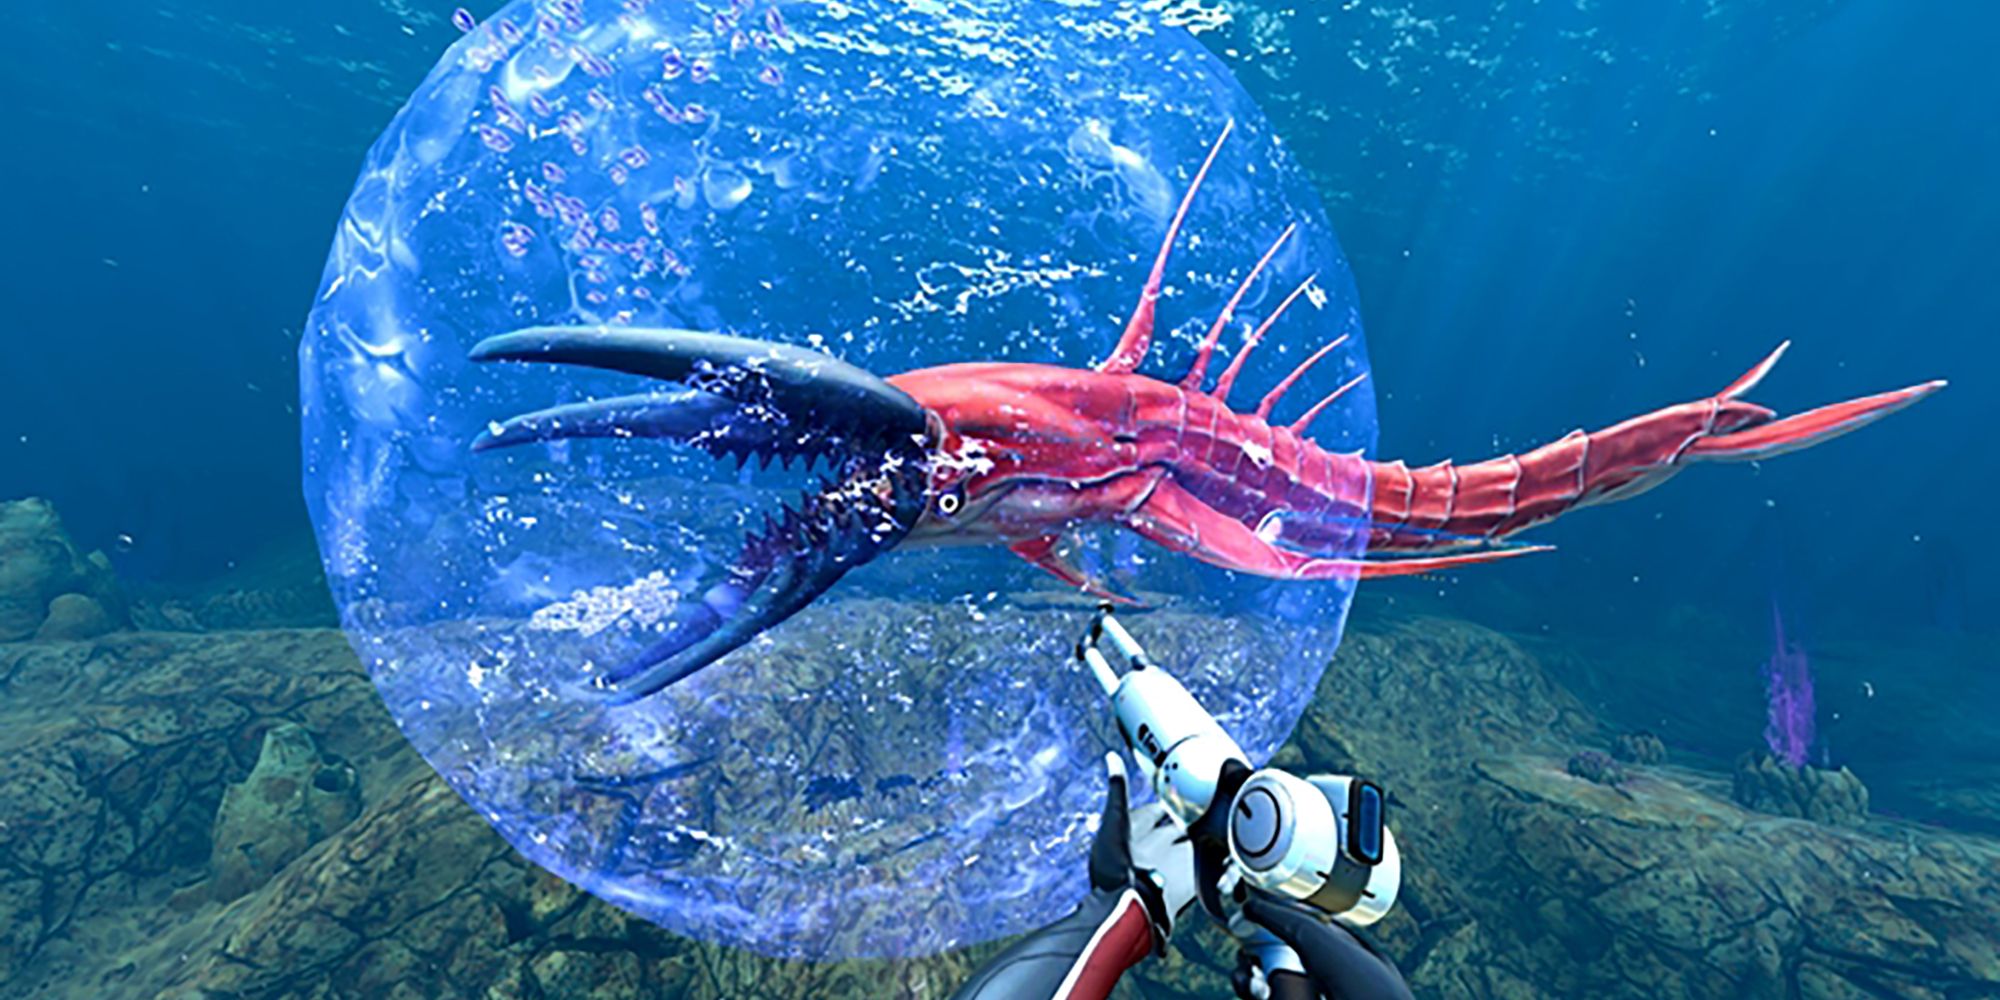 A Stasis Rifle Being Used In Subnautica